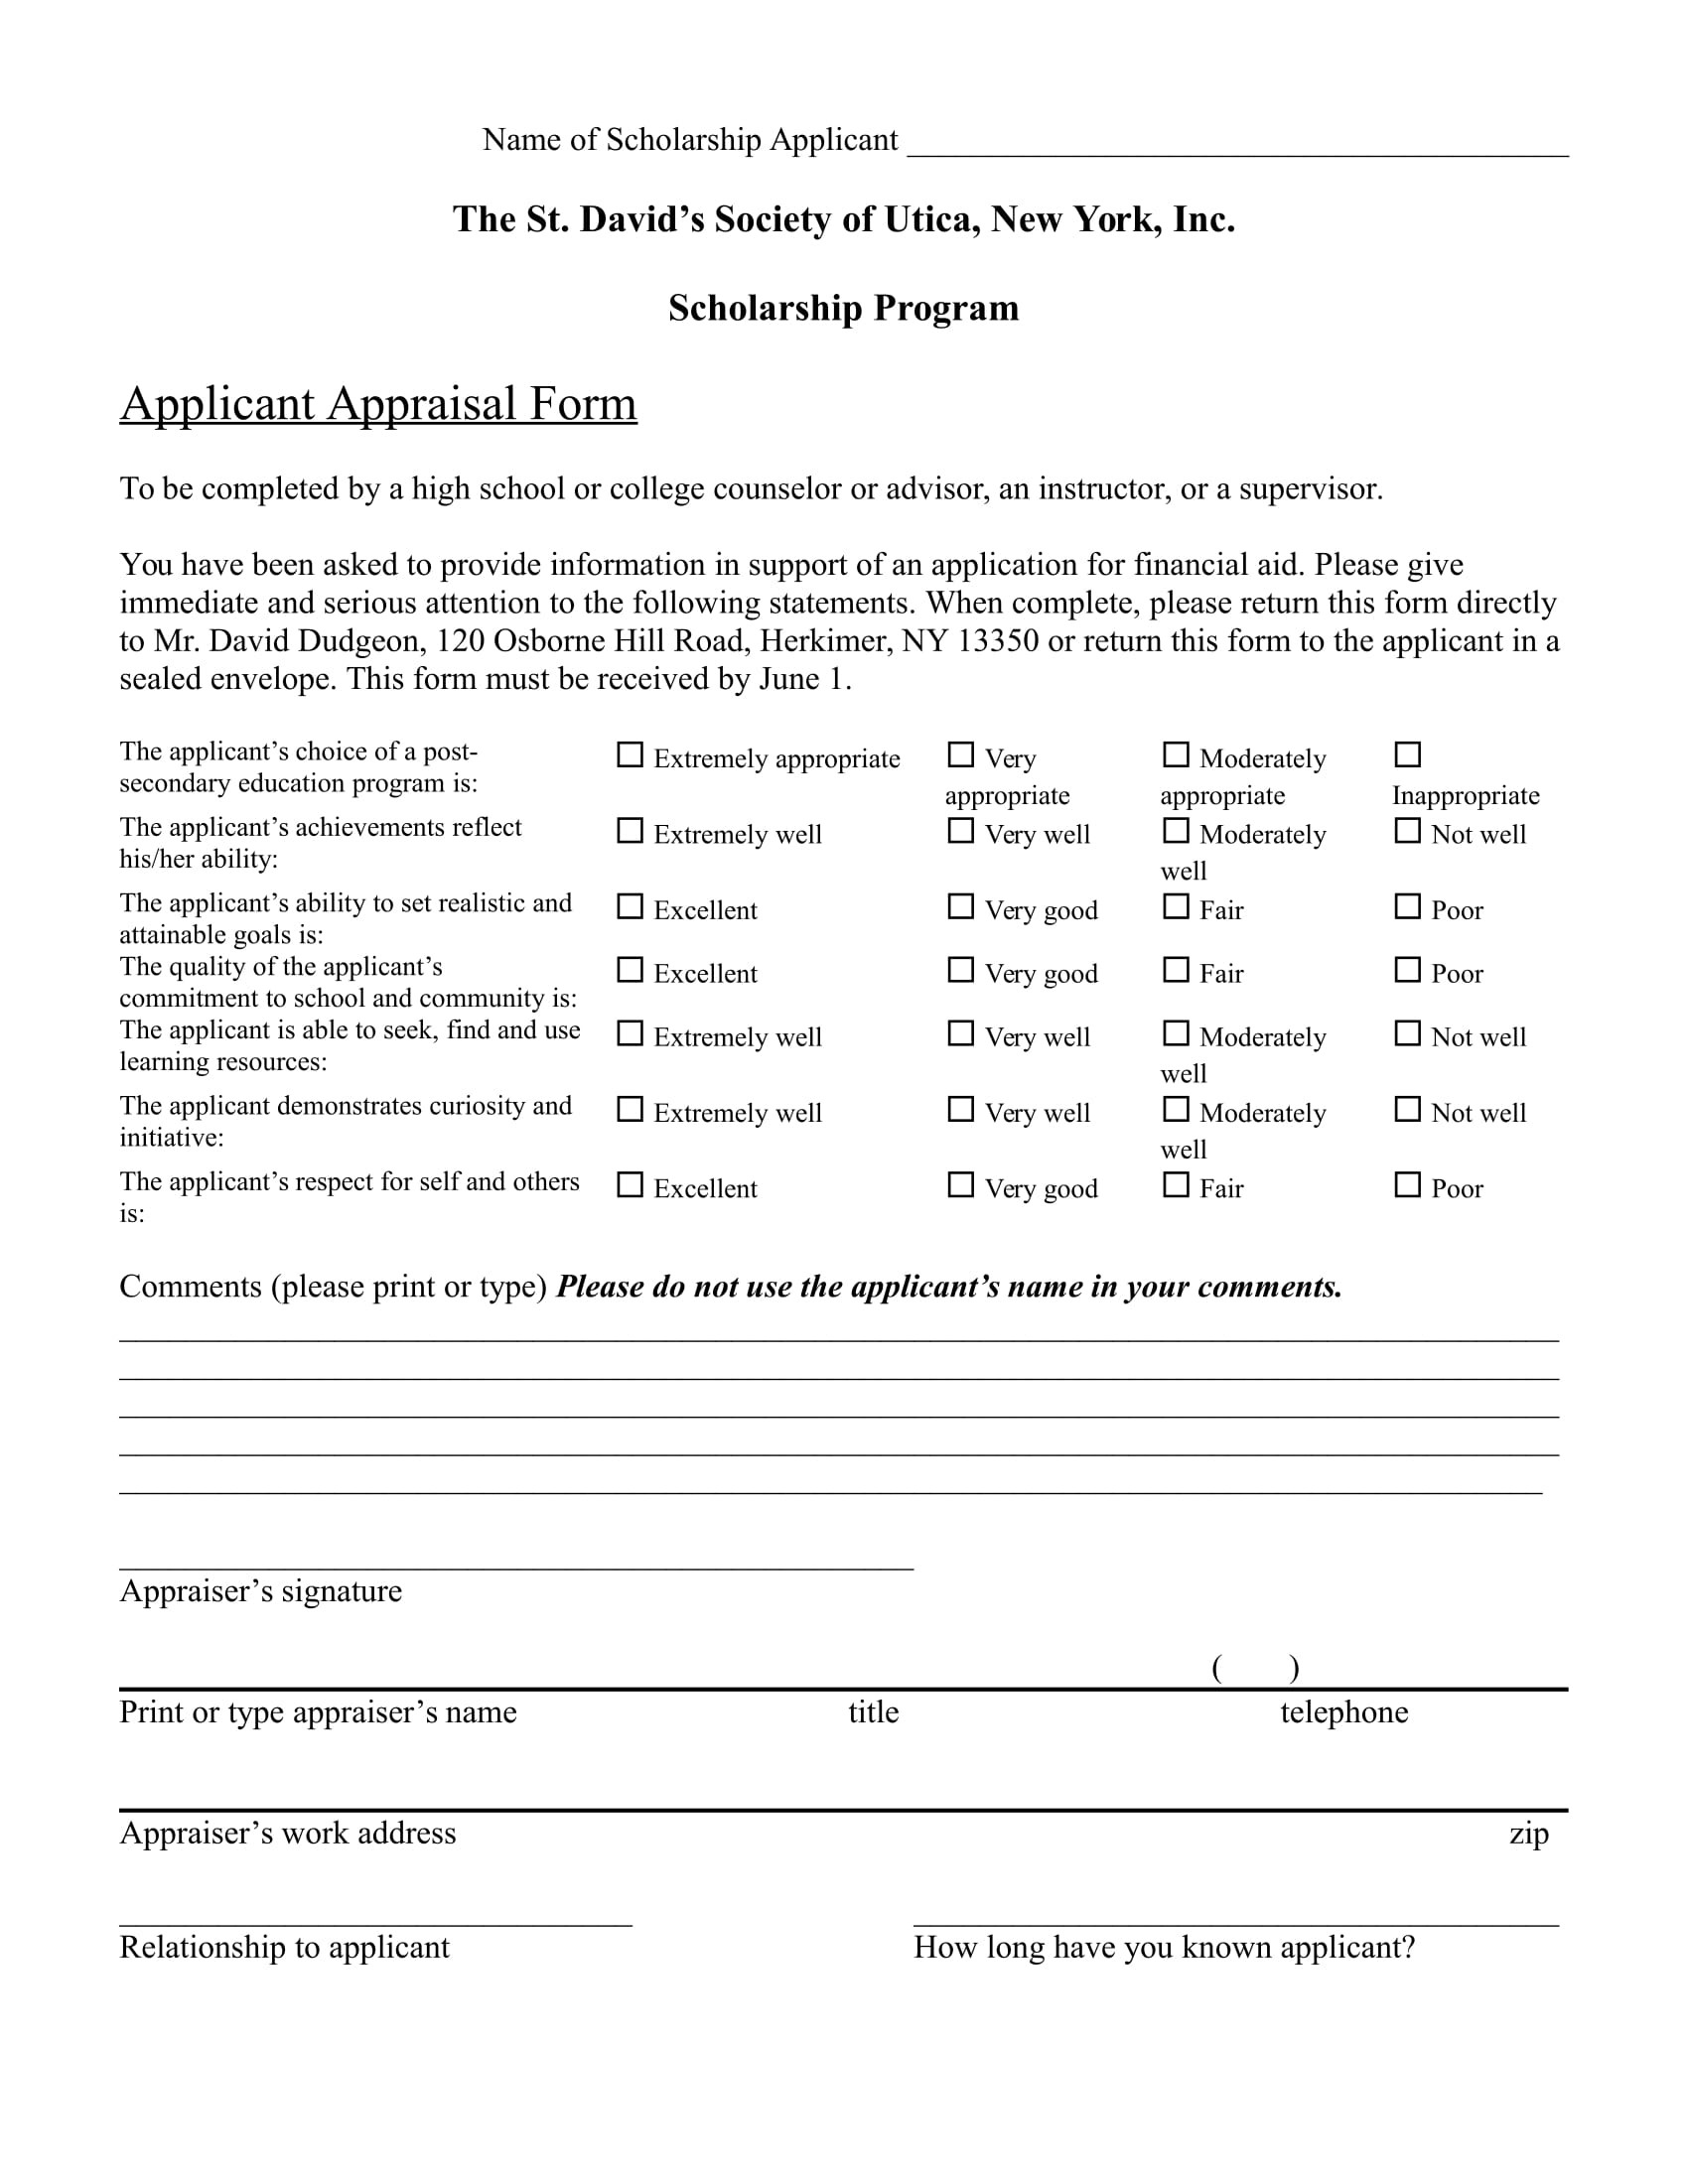 applicant appraisal form in doc 11